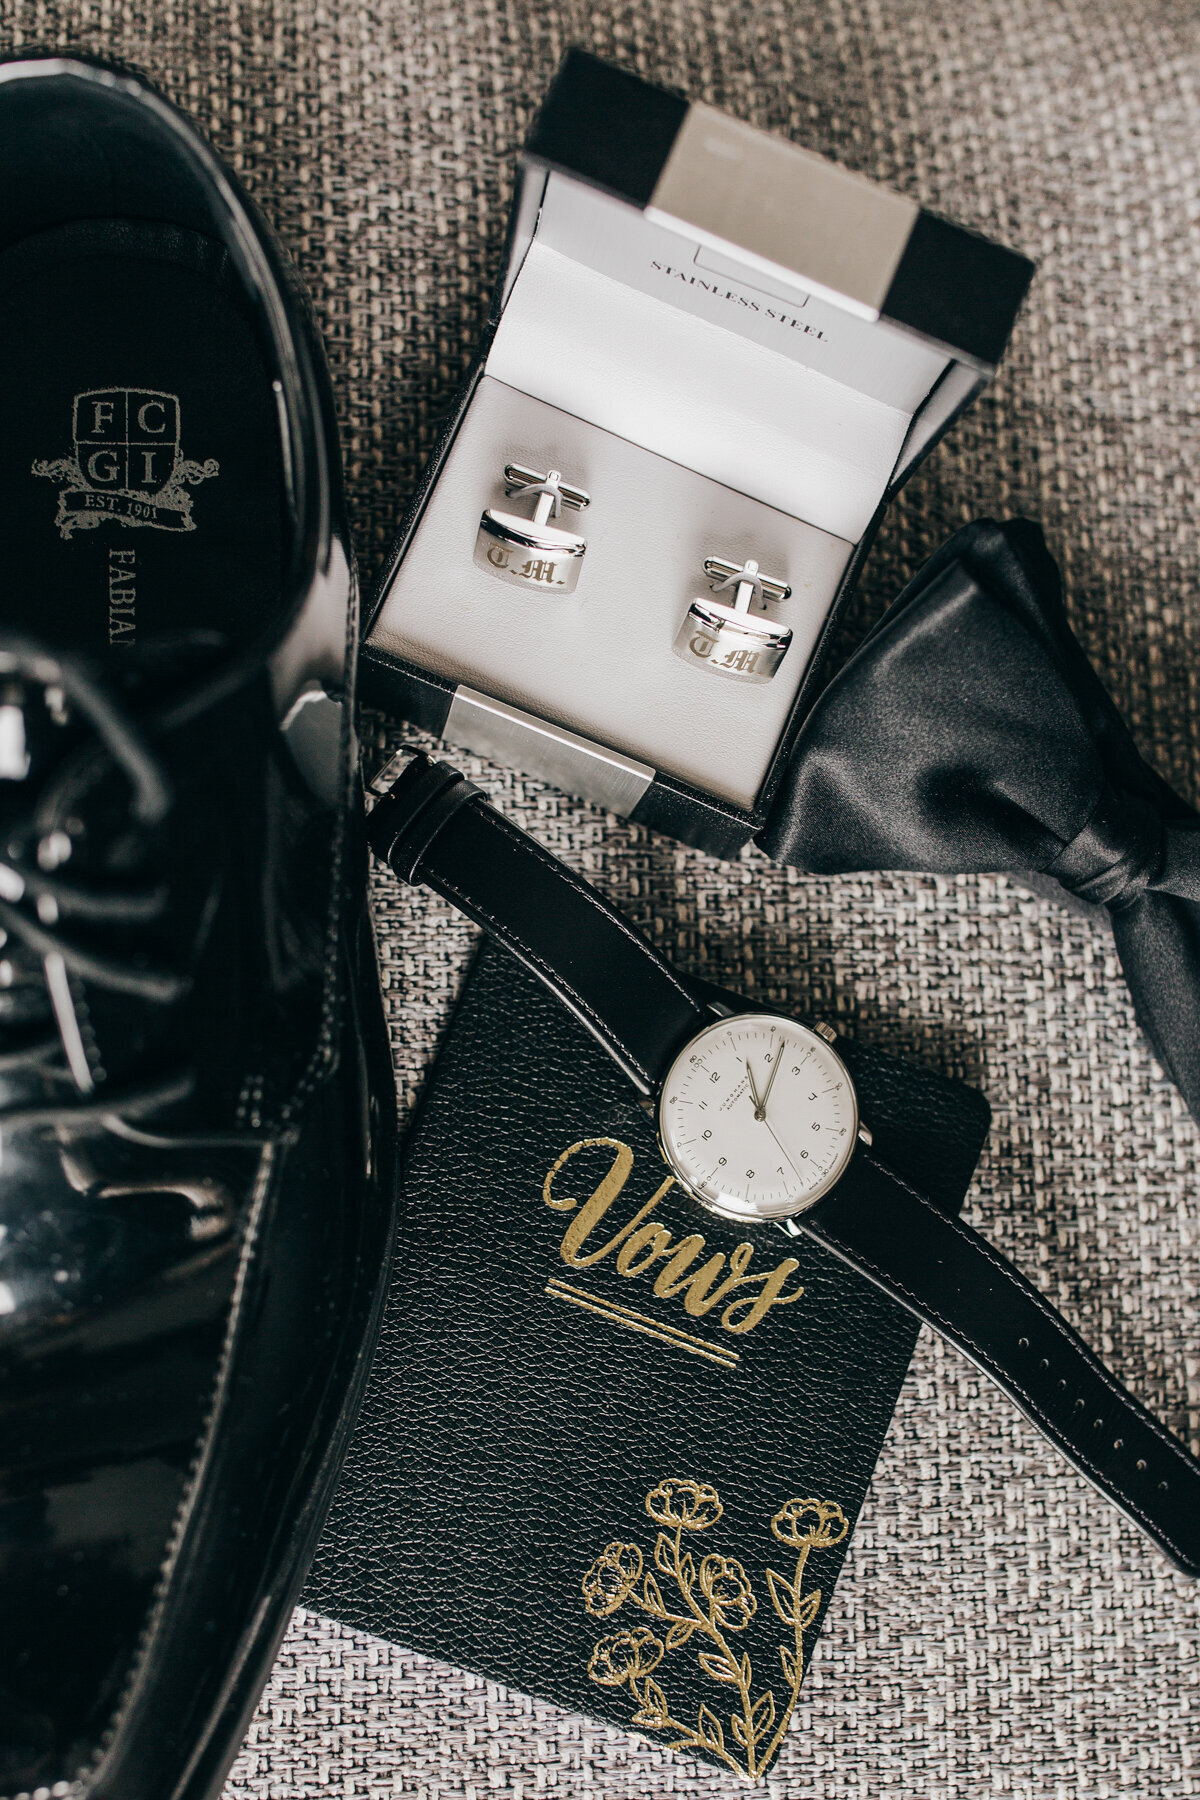 Detail shot of groom's wedding vows, watch, cuff links and bow tie